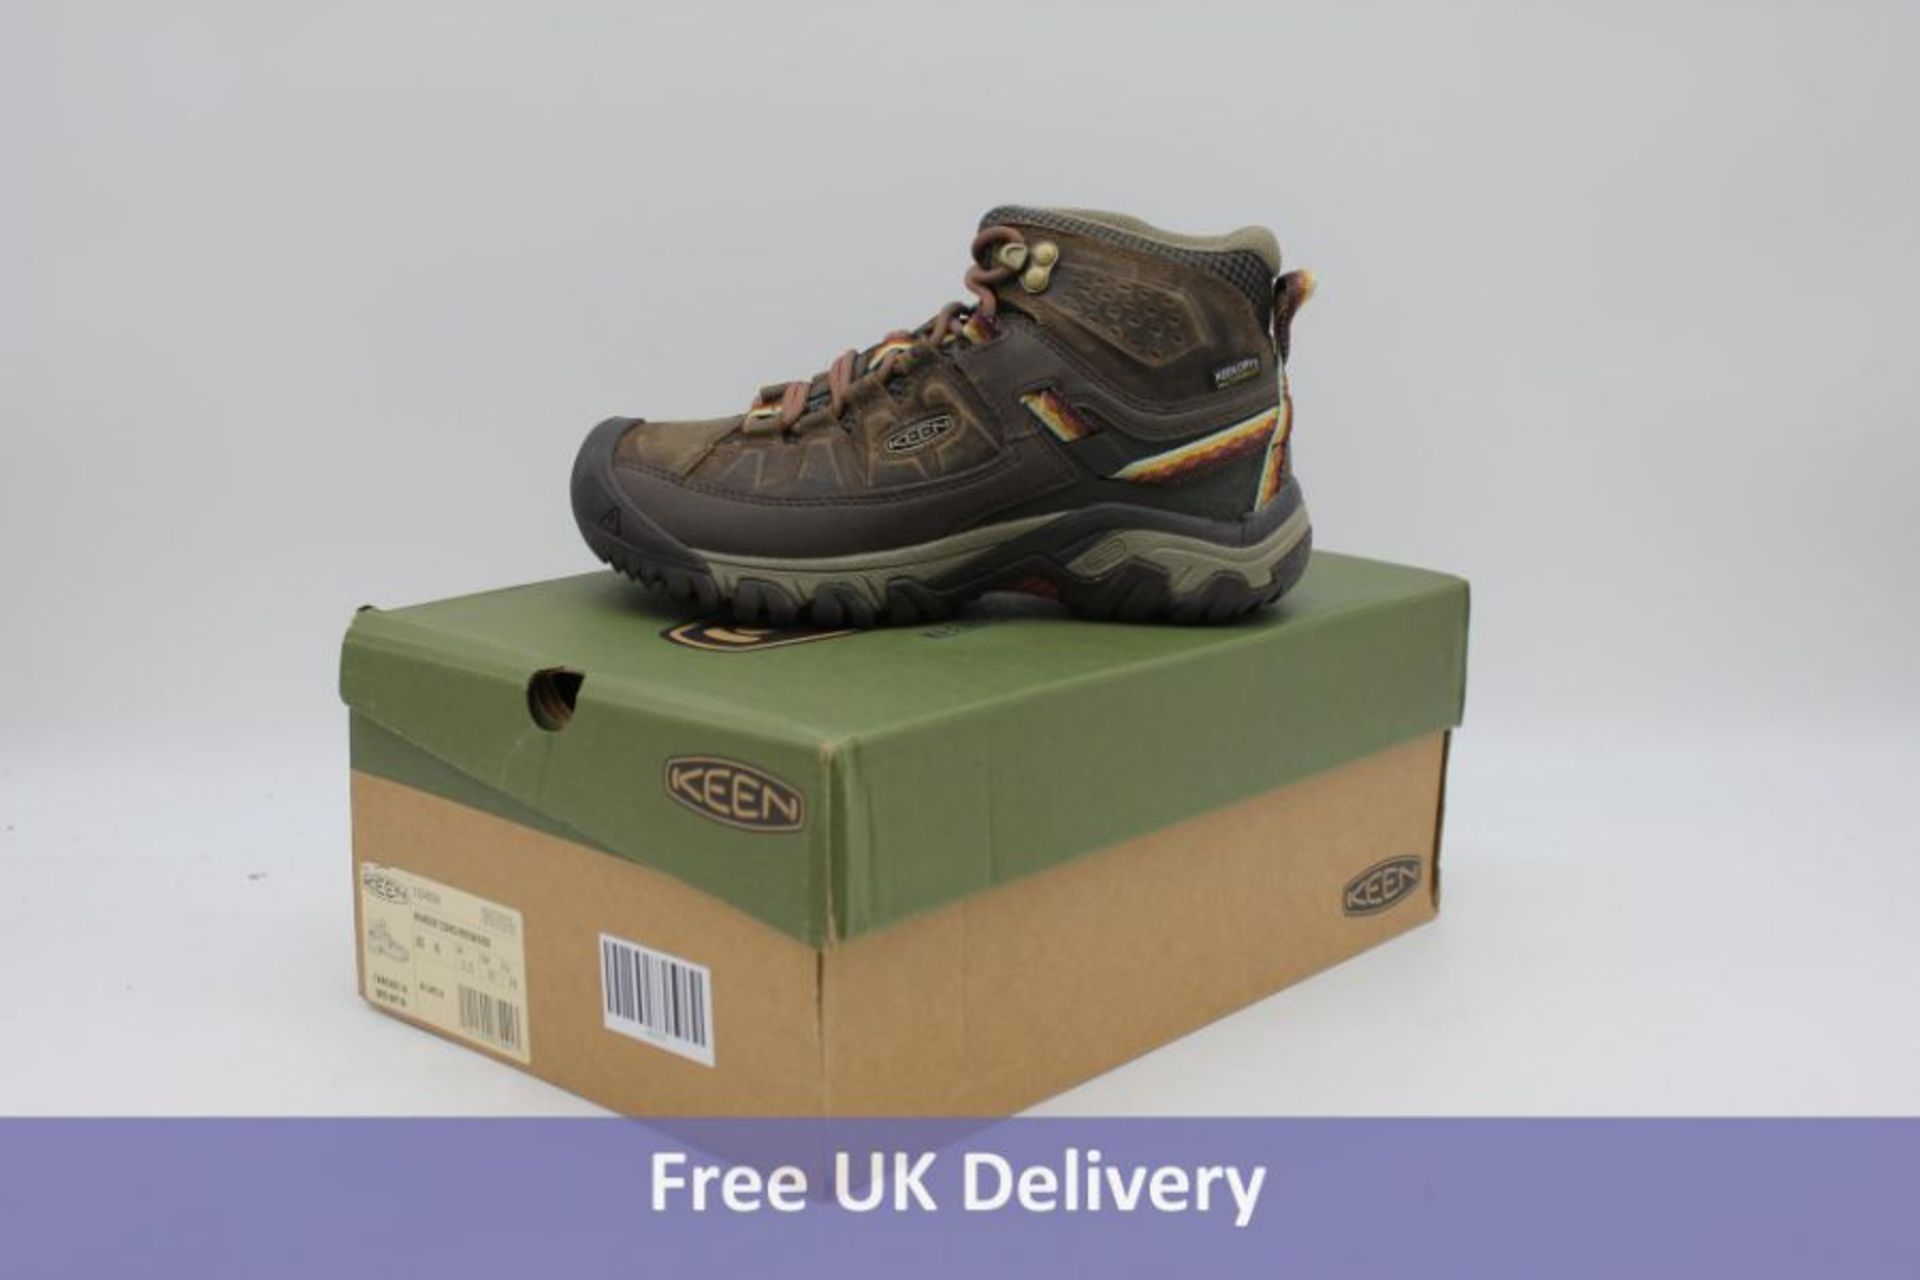 Two Keen Bungee Cord/Redwood Hiking Boots, UK 3.5 - Image 2 of 2